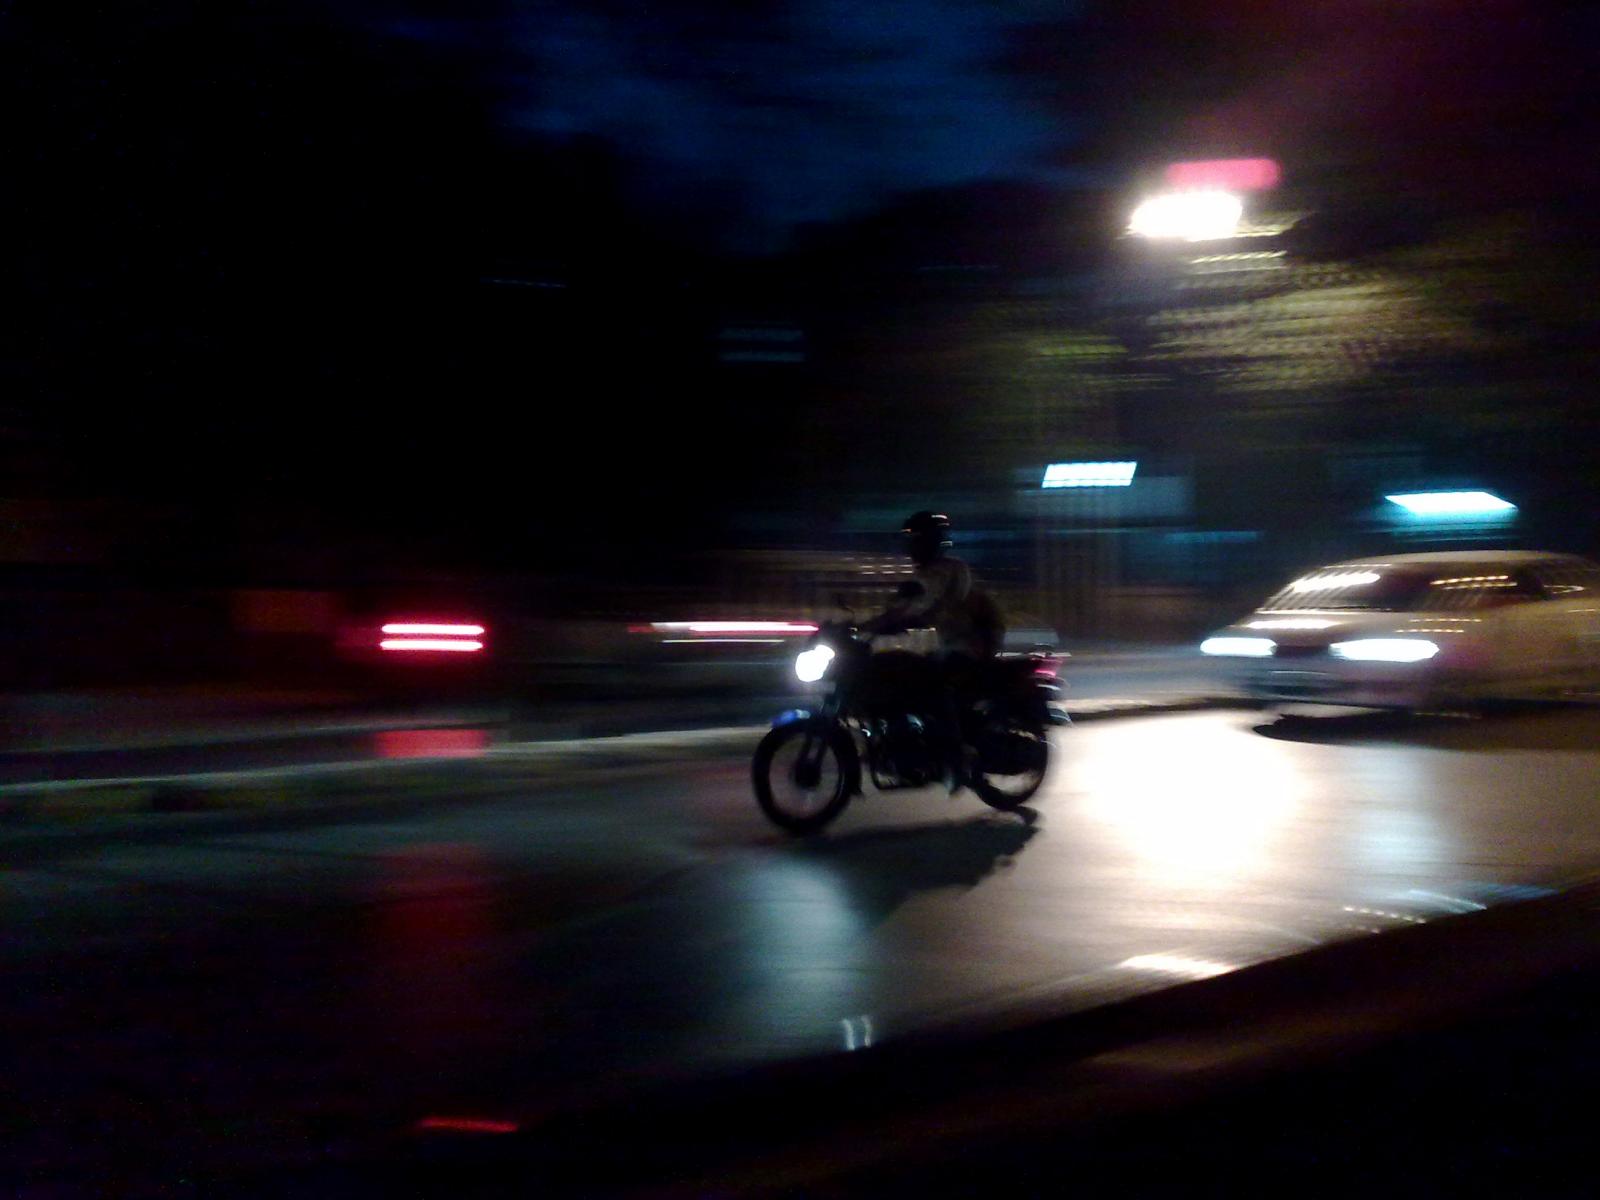 a person riding a motorcycle with a car passing behind him on the road